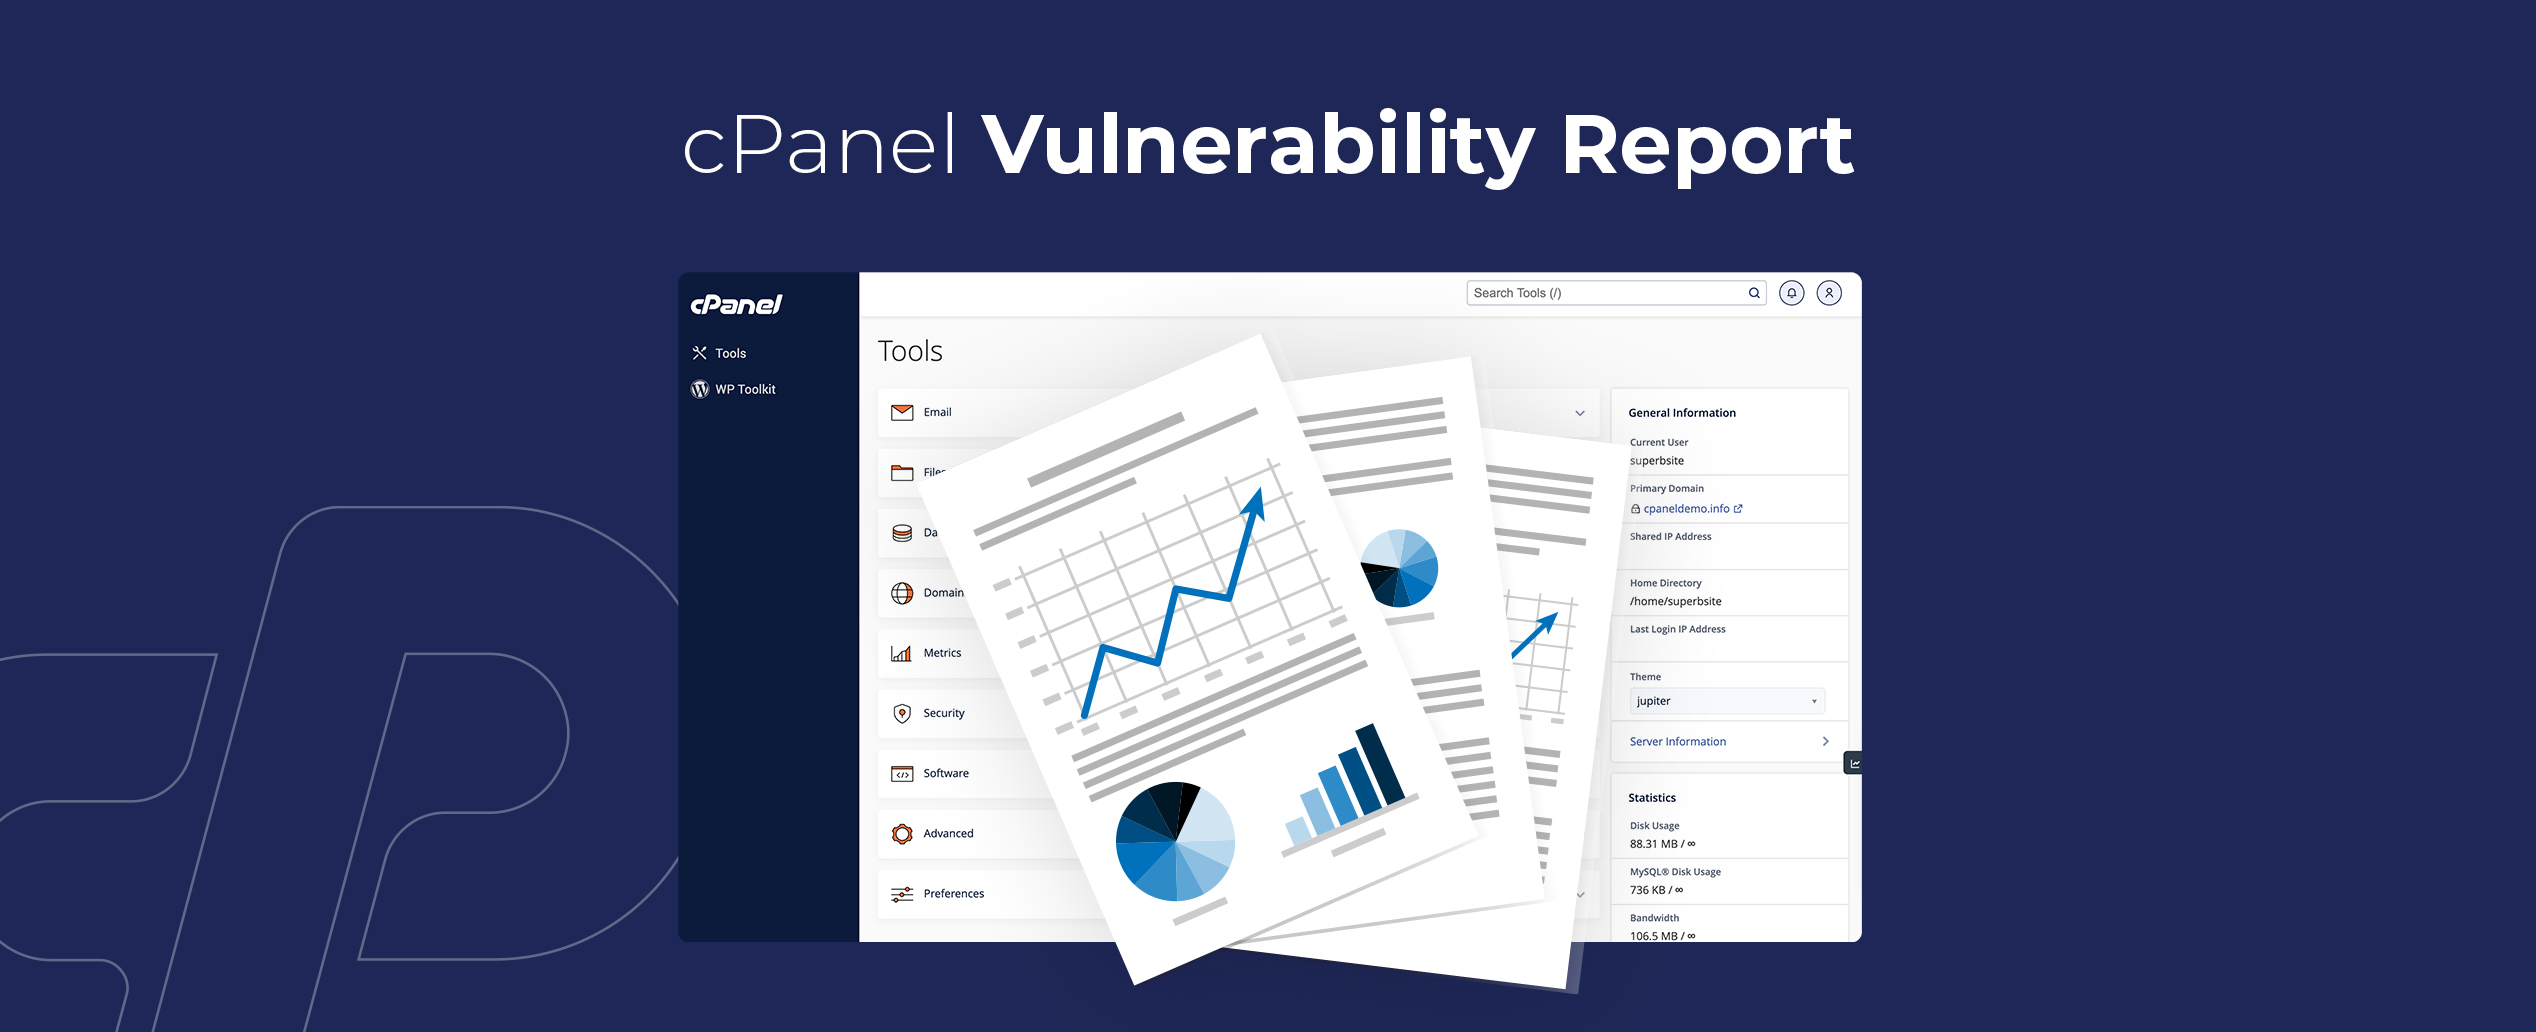 cPanel Vulnerability Report: No Actions Required by Default - cPanel Blog